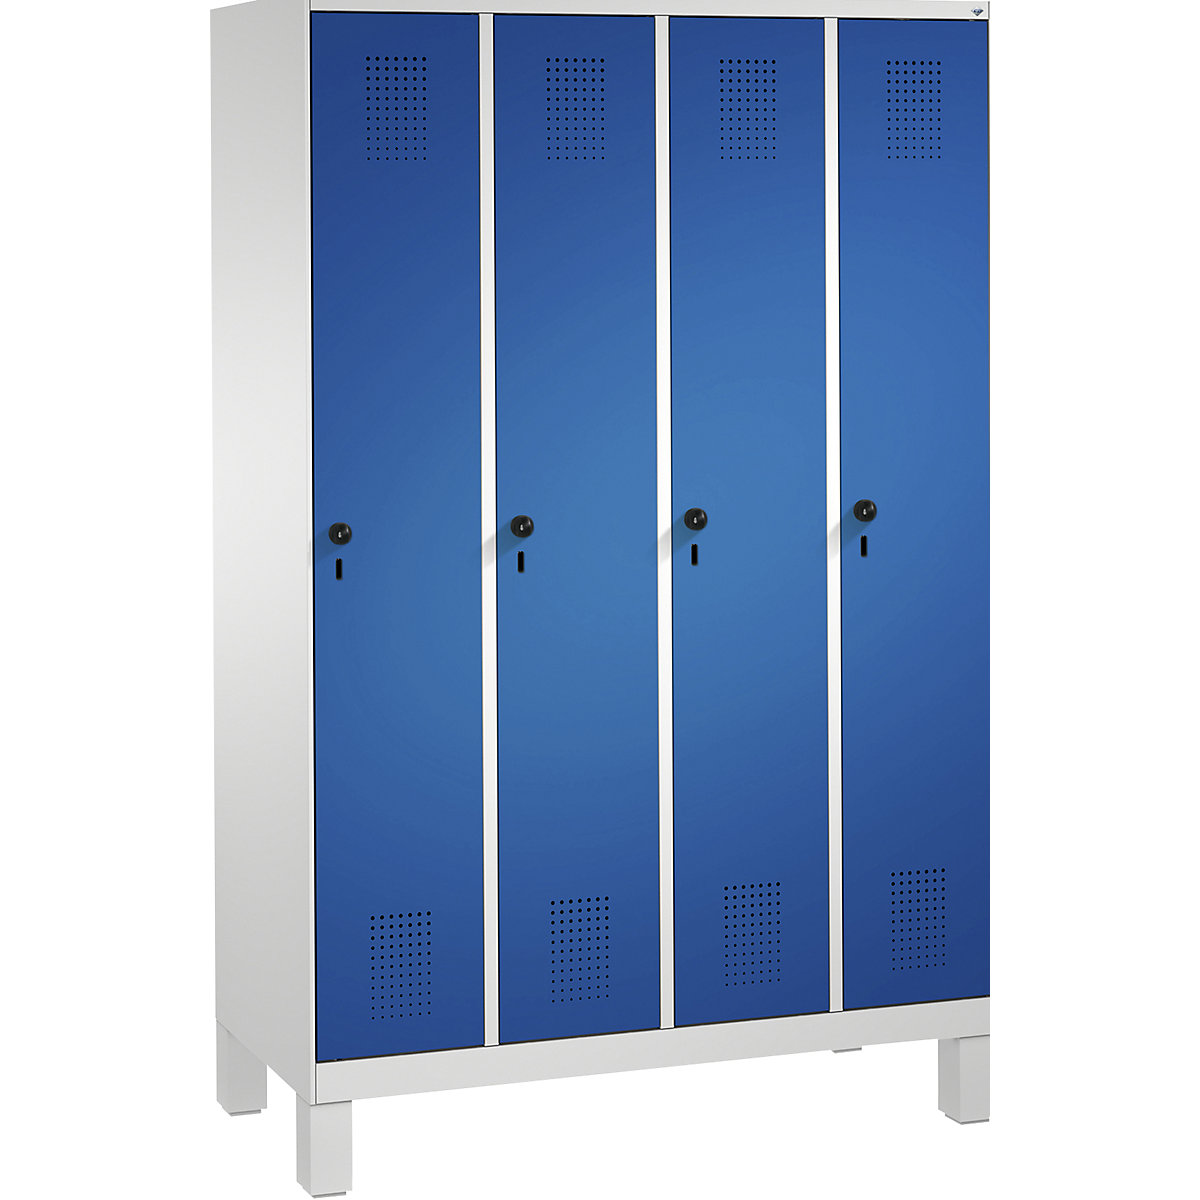 EVOLO cloakroom locker, with feet – C+P, 4 compartments, compartment width 300 mm, light grey / gentian blue-15